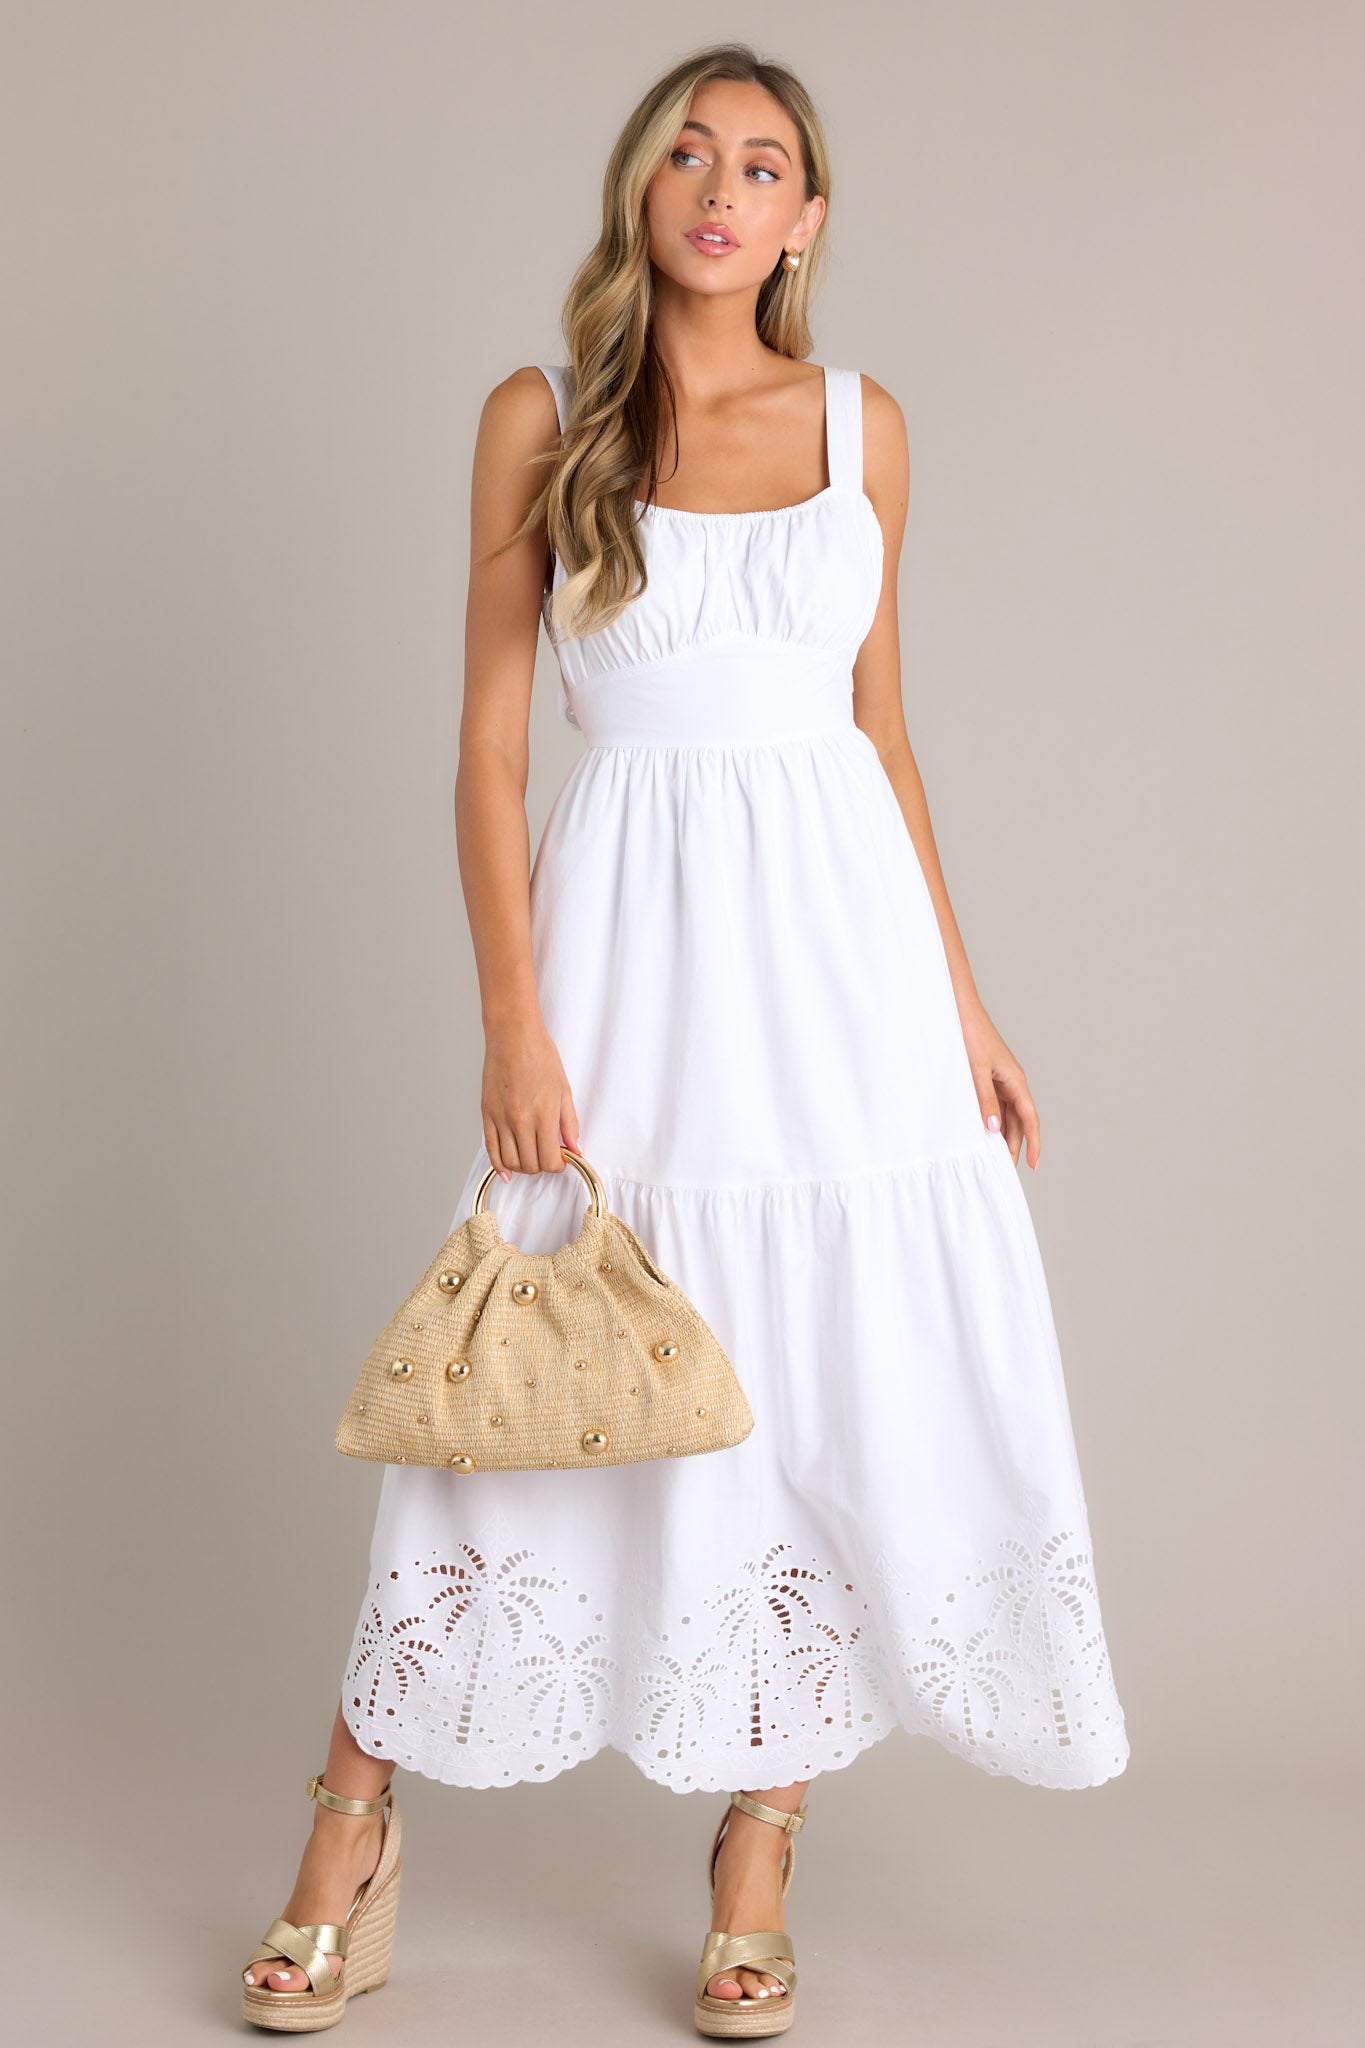 This white midi dress features an elastic square neckline, thick adjustable straps, a thick waistband with a self-tie back feature, an open lower back, a single tier, palm eyelet detailing, and a scalloped hemline.